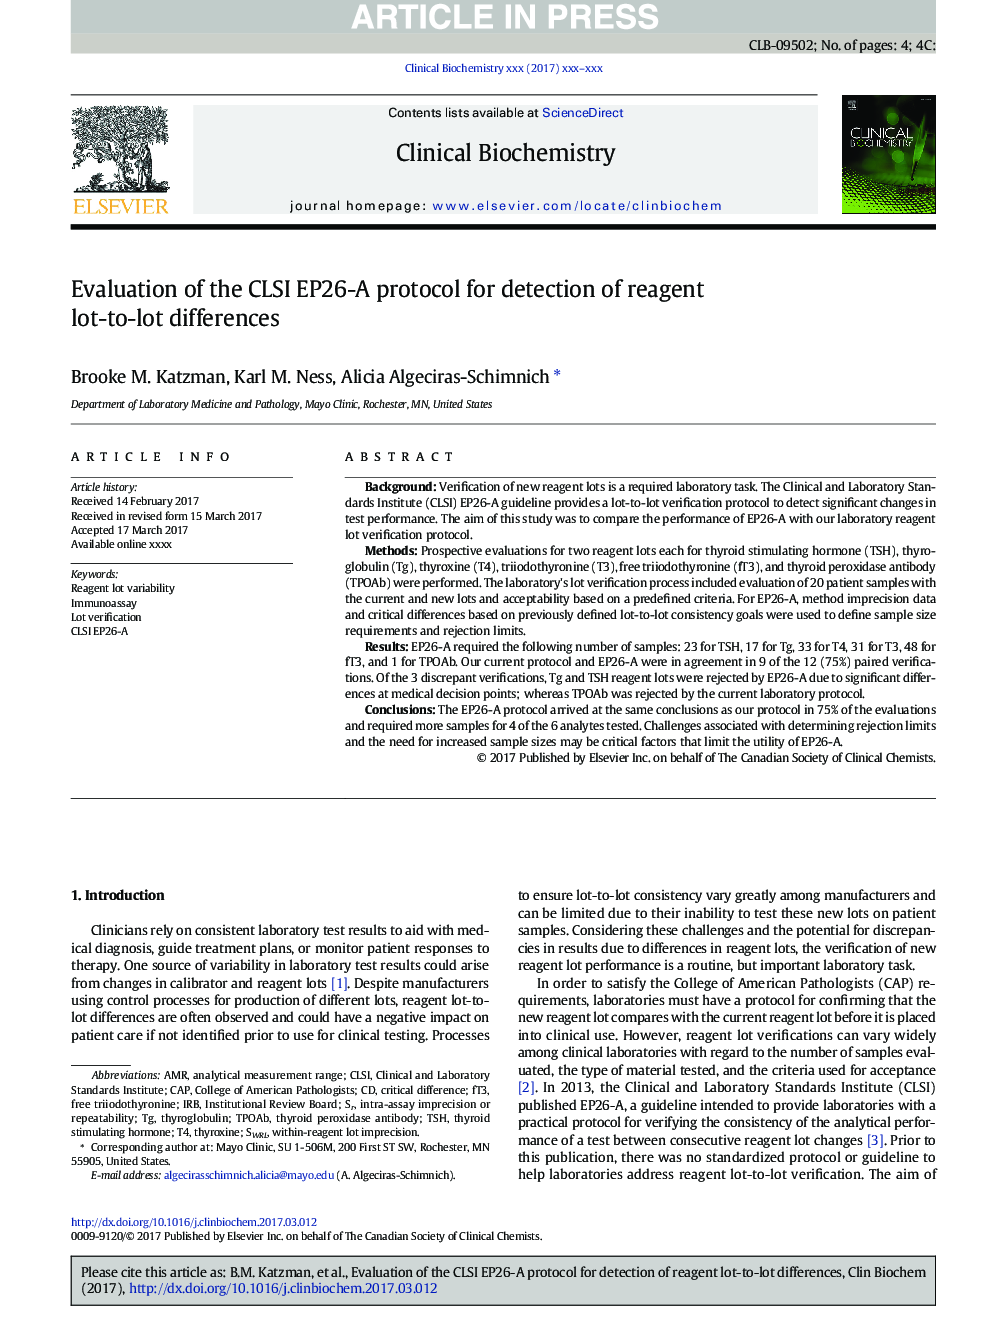 Evaluation of the CLSI EP26-A protocol for detection of reagent lot-to-lot differences